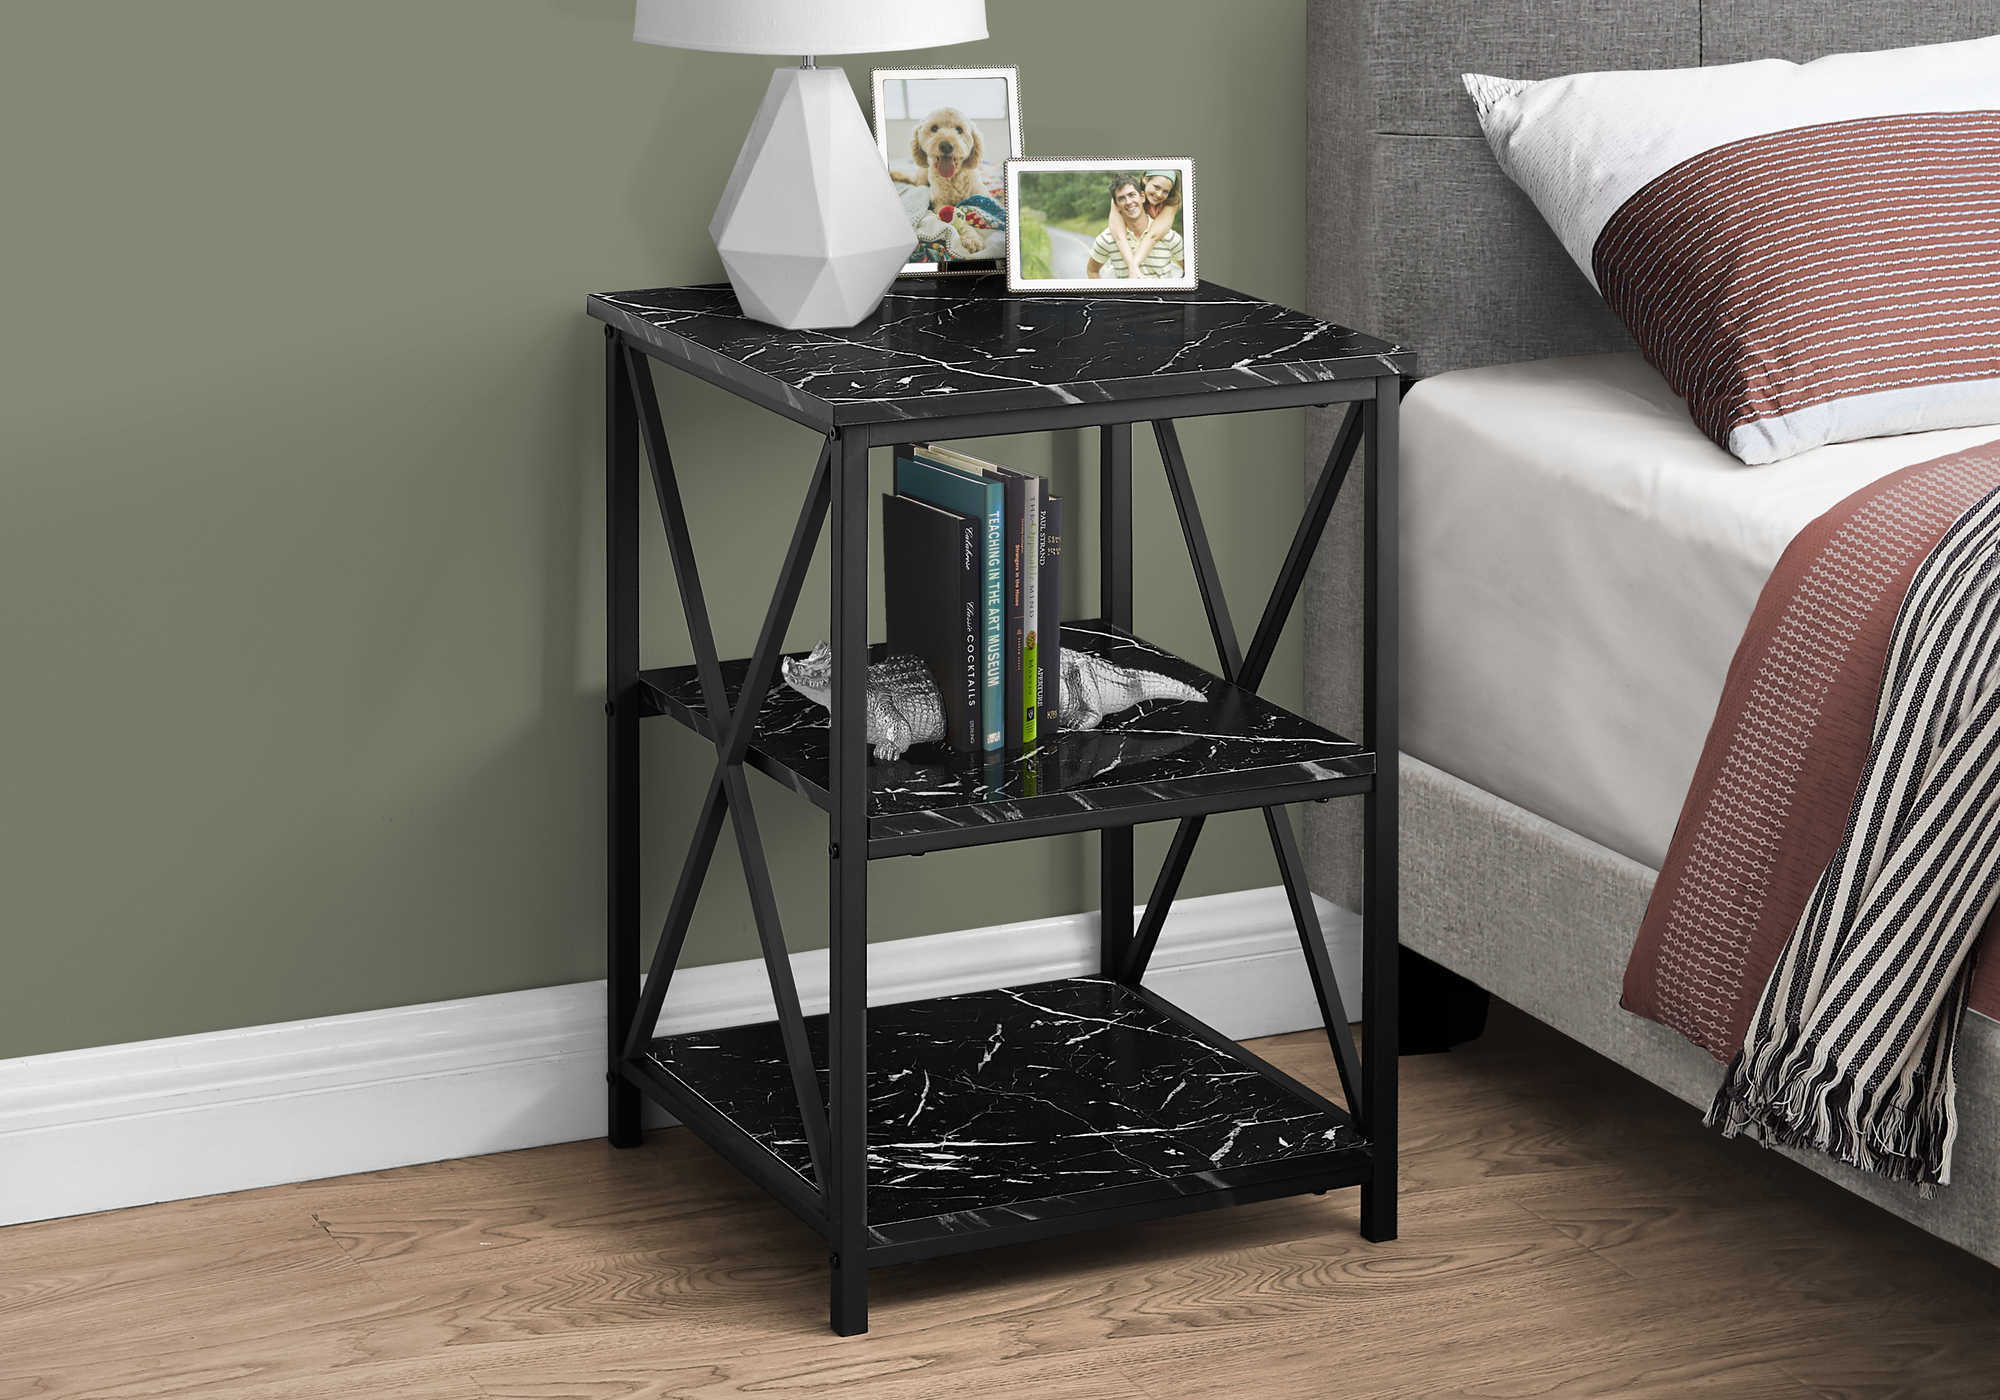 ACCENT TABLE - 26"H / BLACK MARBLE / BLACK METAL